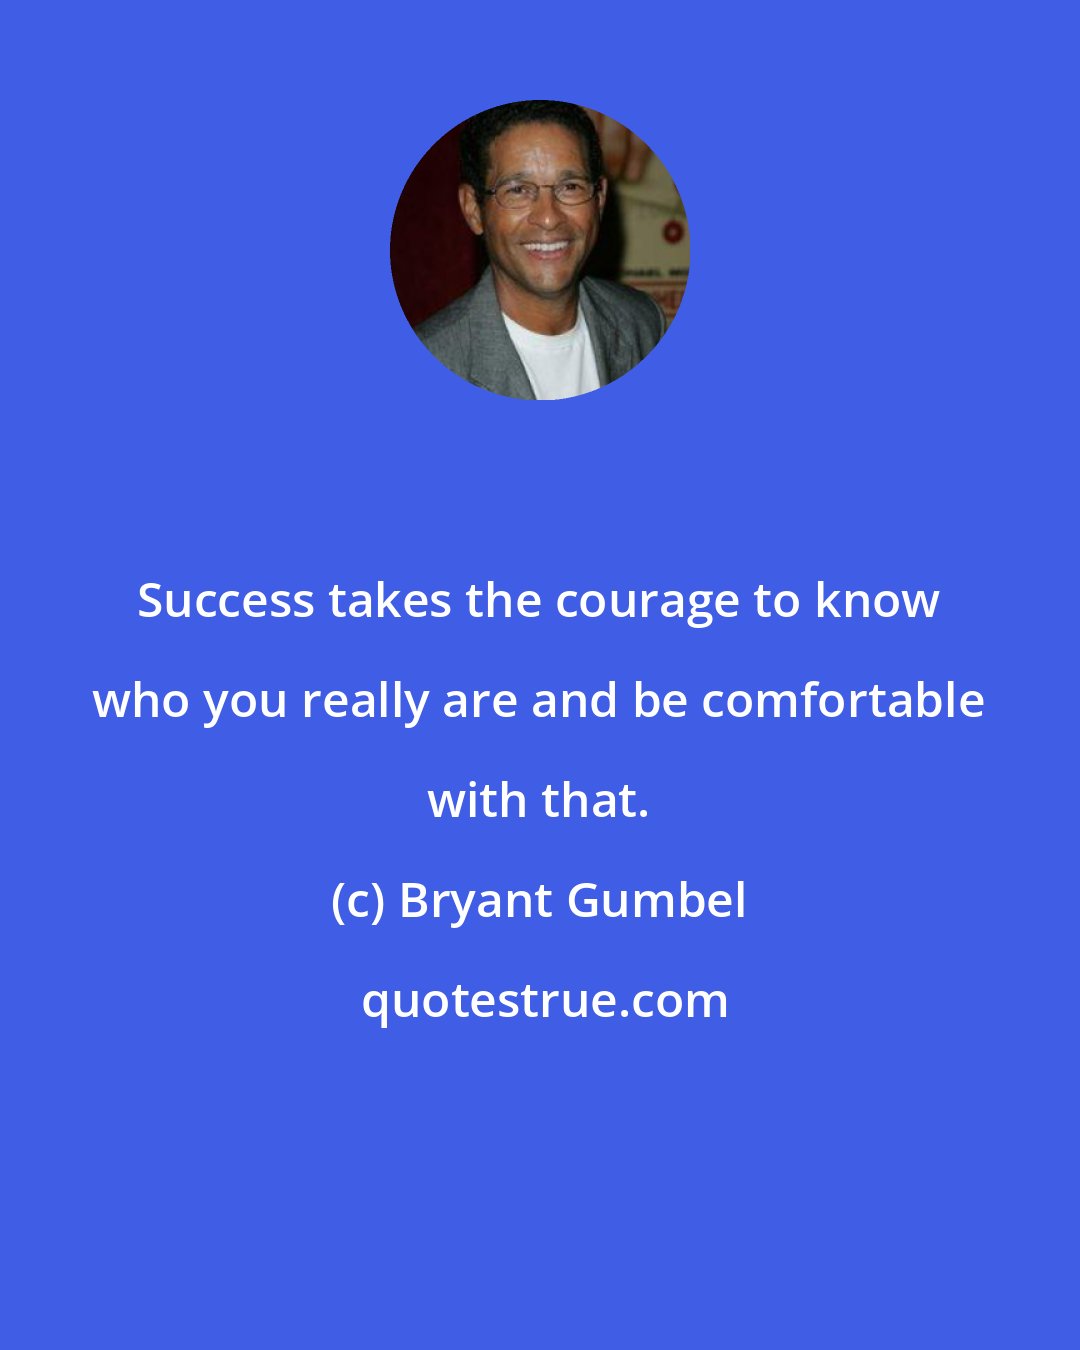 Bryant Gumbel: Success takes the courage to know who you really are and be comfortable with that.